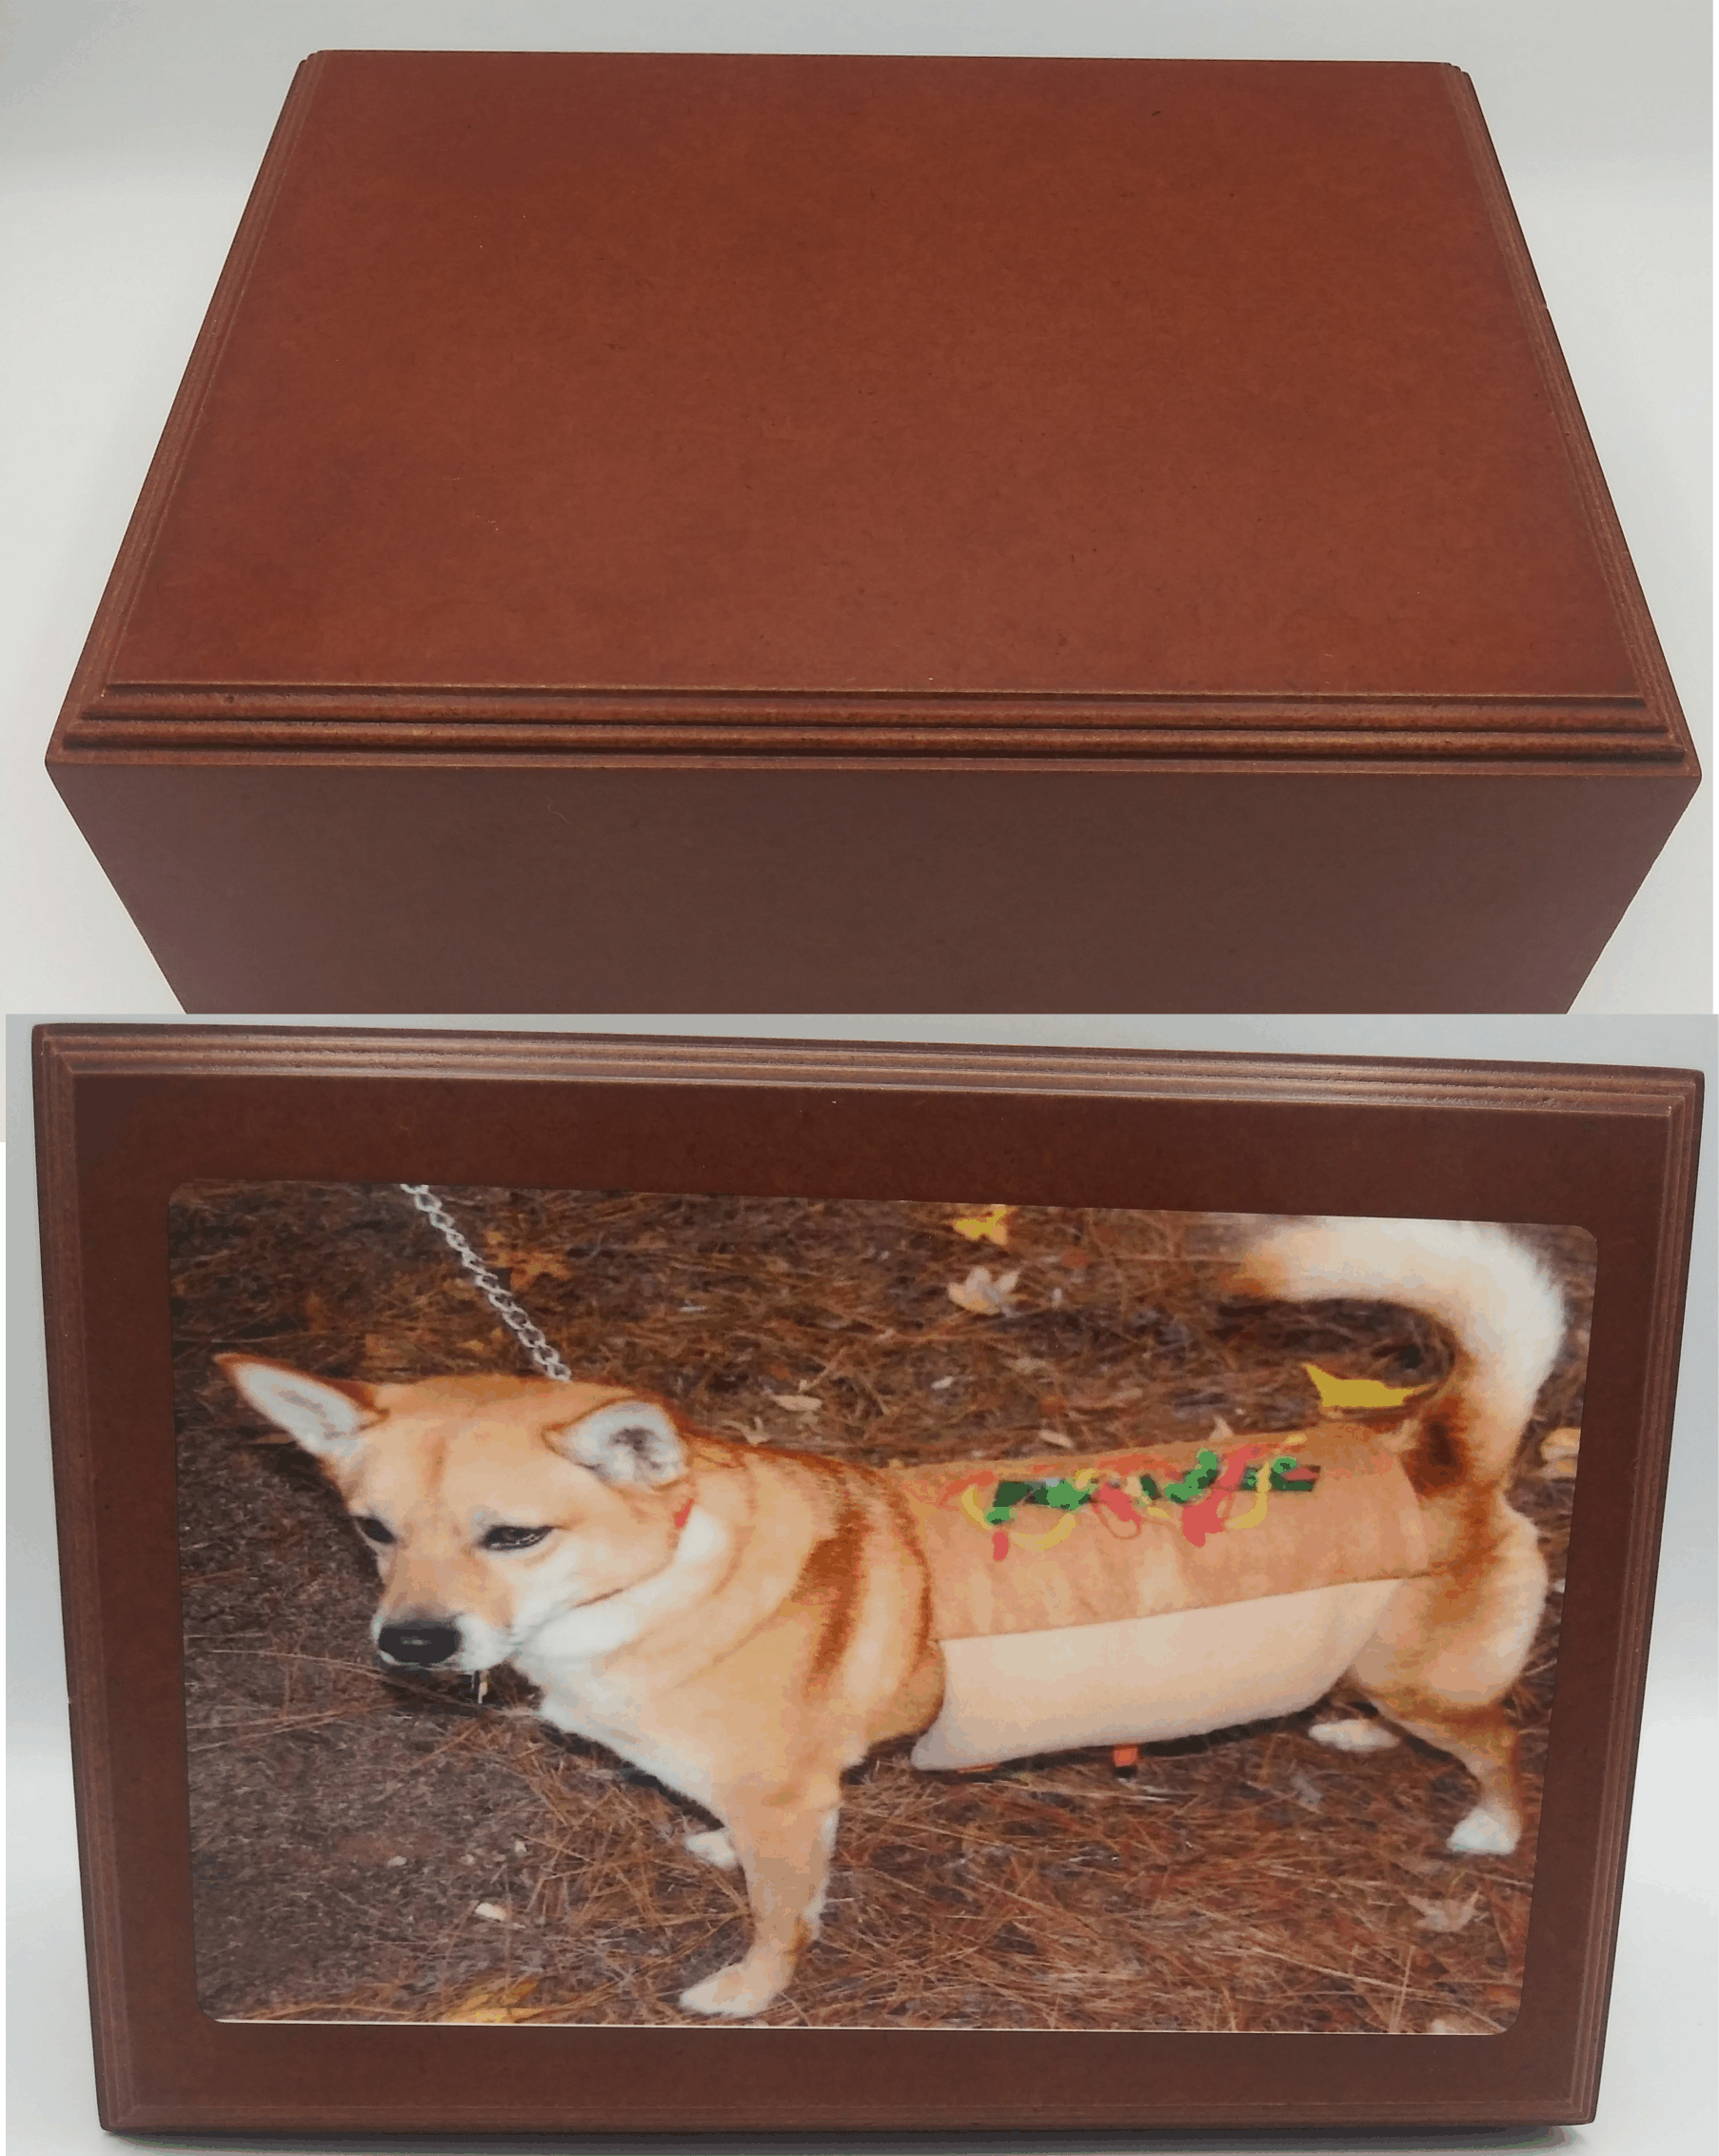 This photo panel took the cherry wood pet memorial box to the next level by giving the box pers